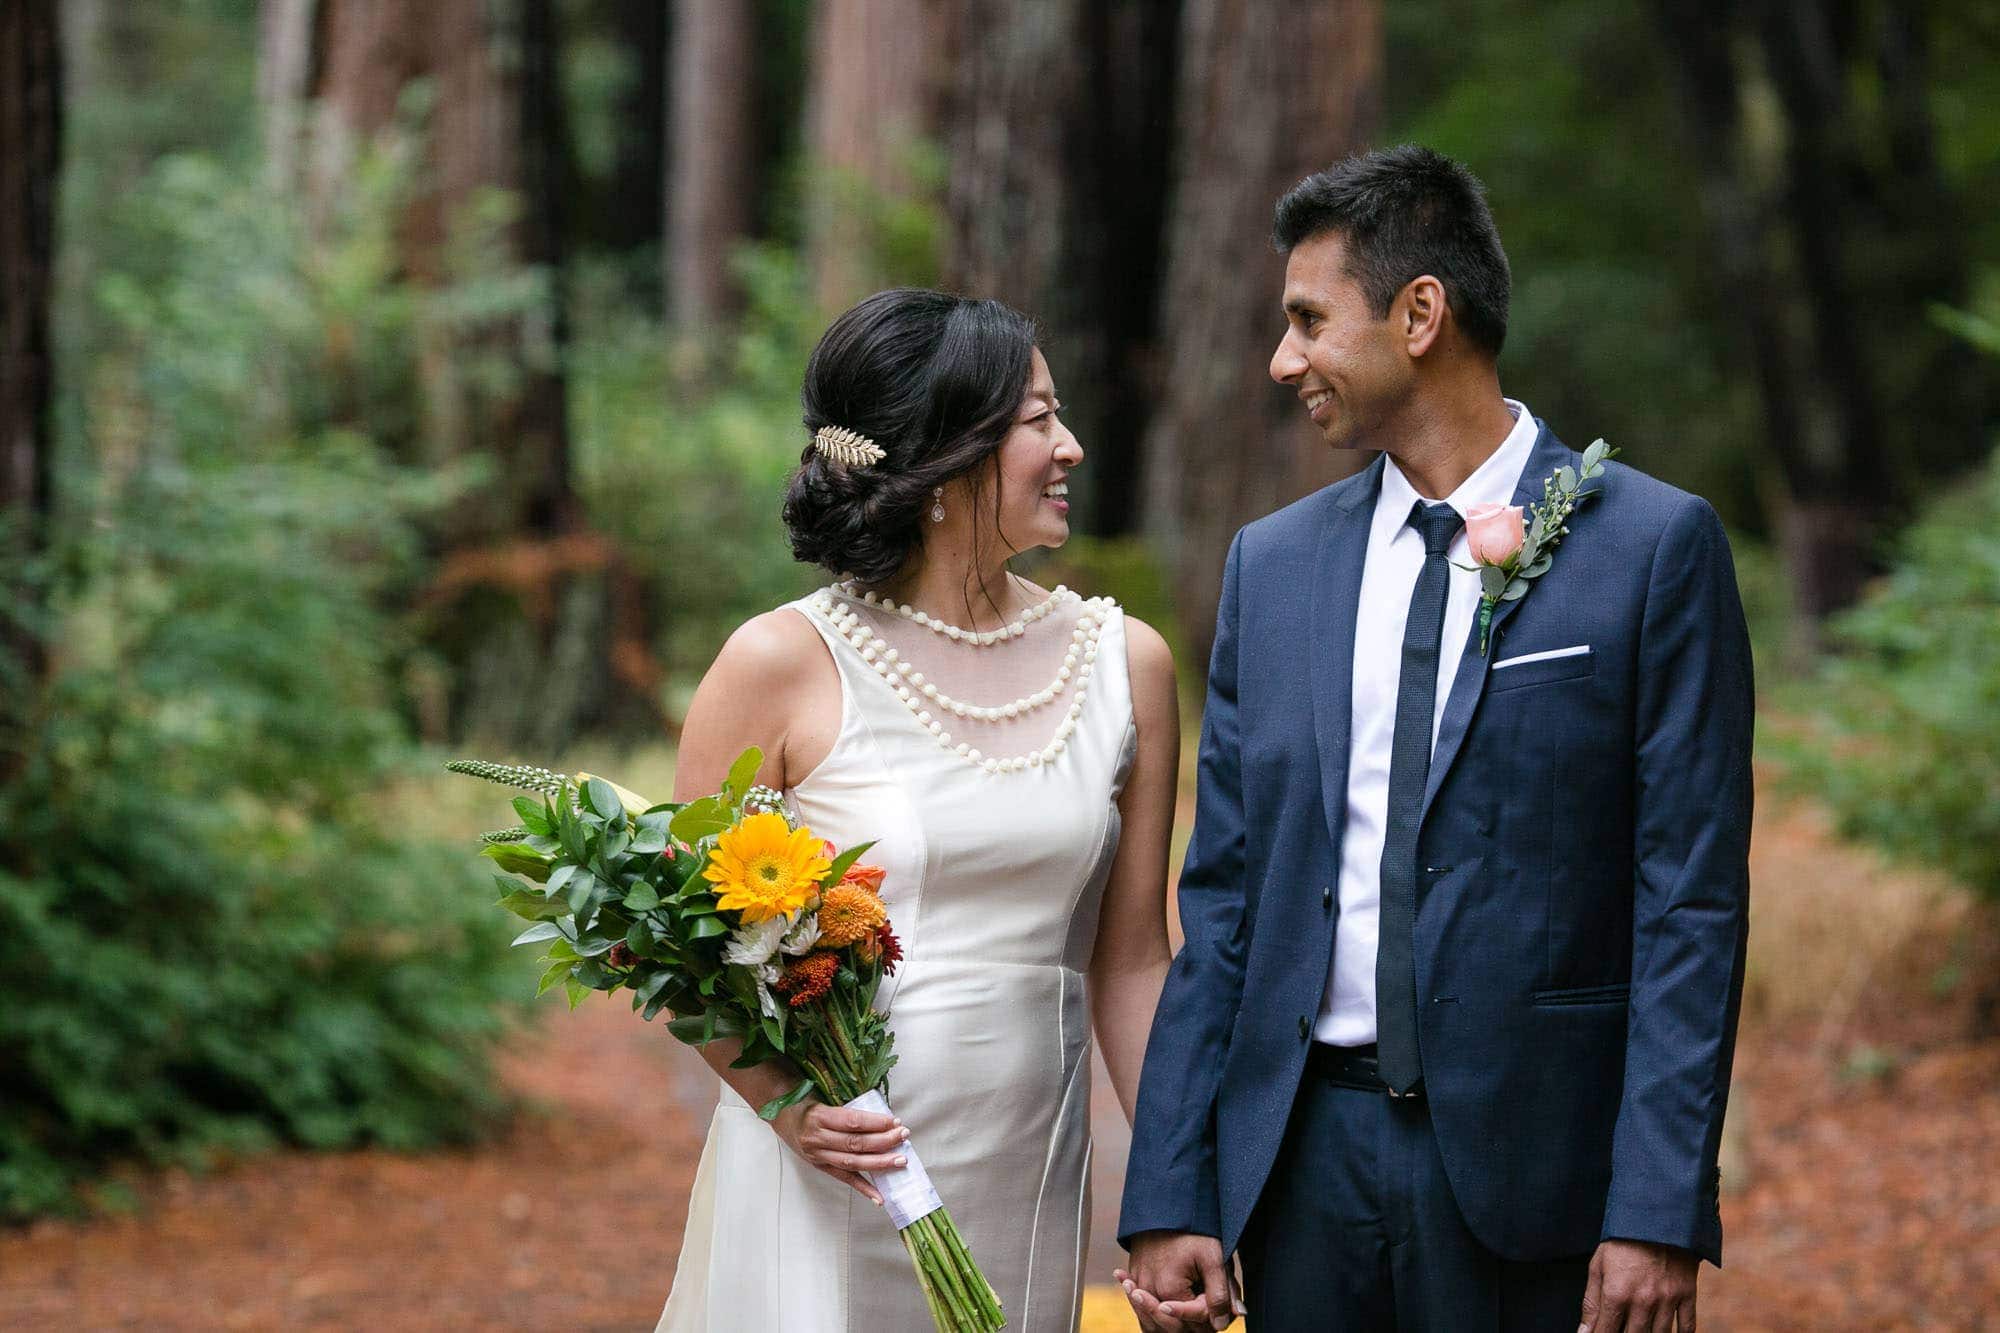 Bride with bouquet and groom in blue suit looking at each other and smiling